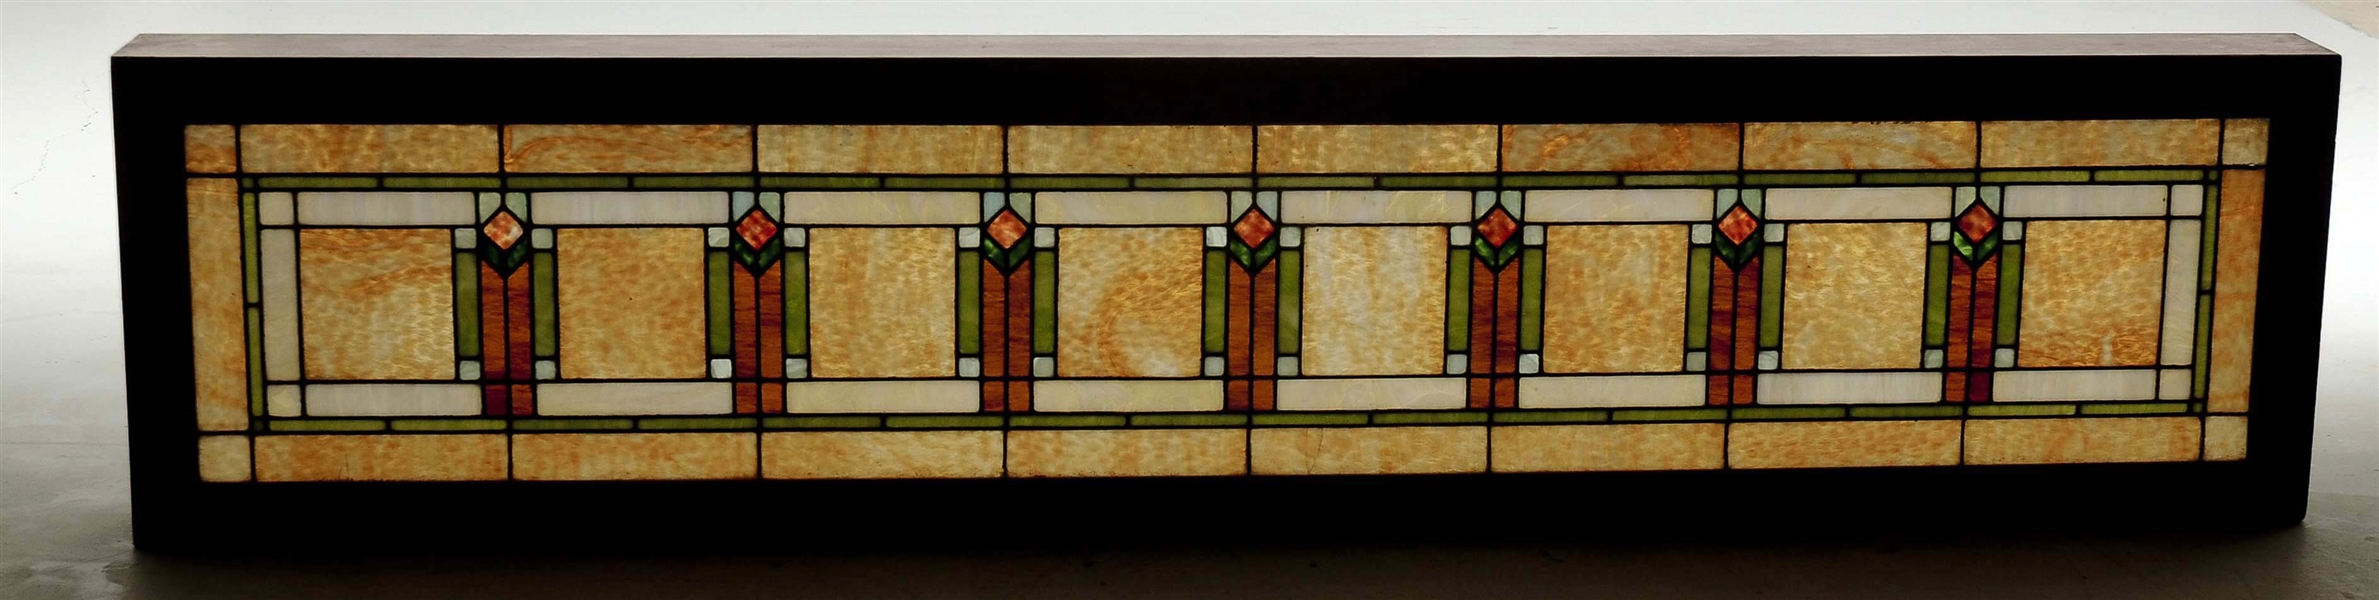 PRAIRIE STYLE STAINED GLASS WINDOW.  